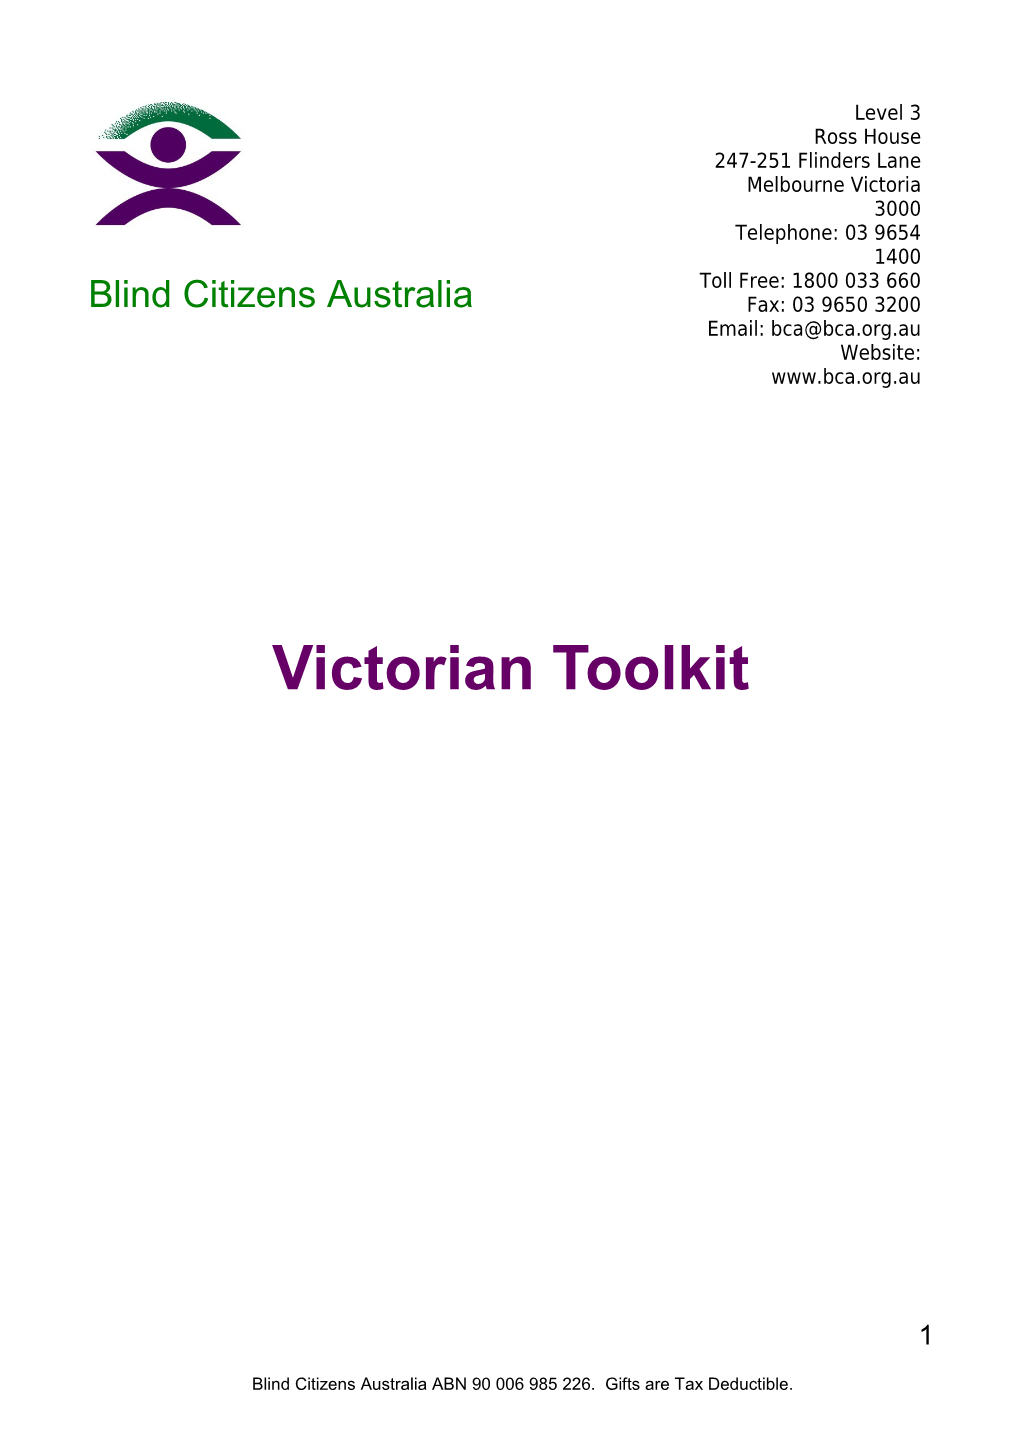 Welcome to BCA S Victorian Toolkit